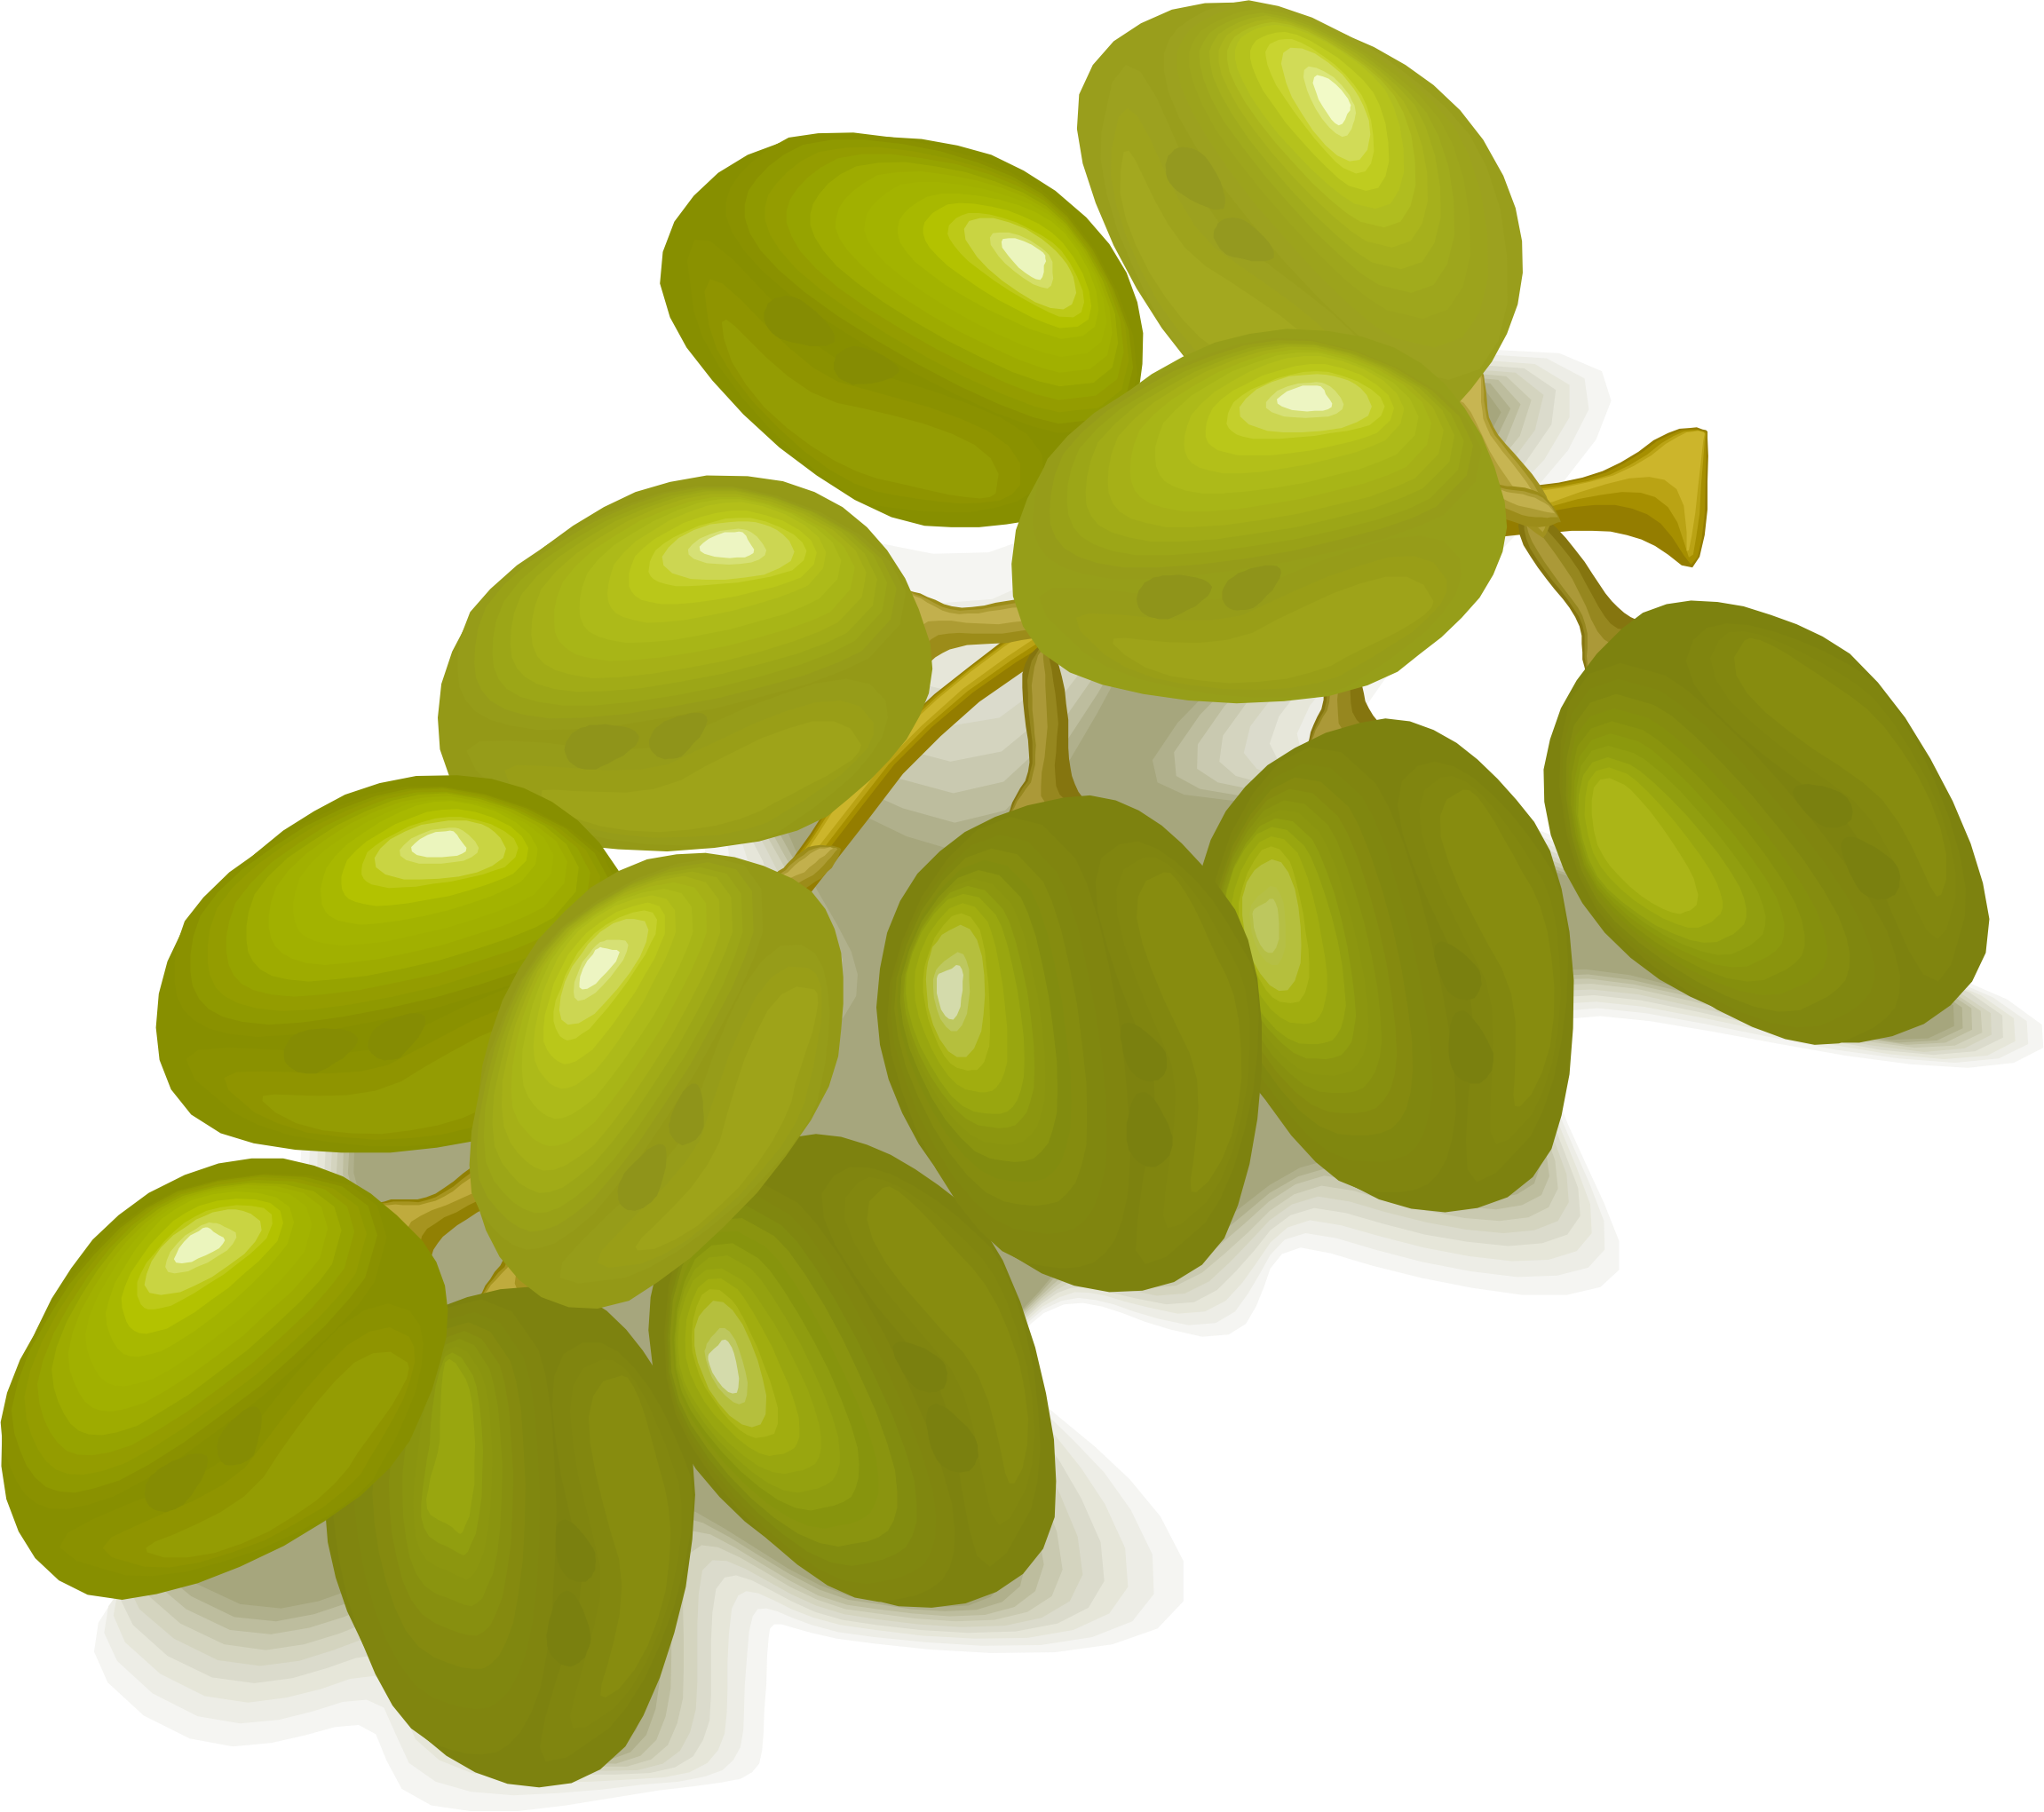 Grapes olive